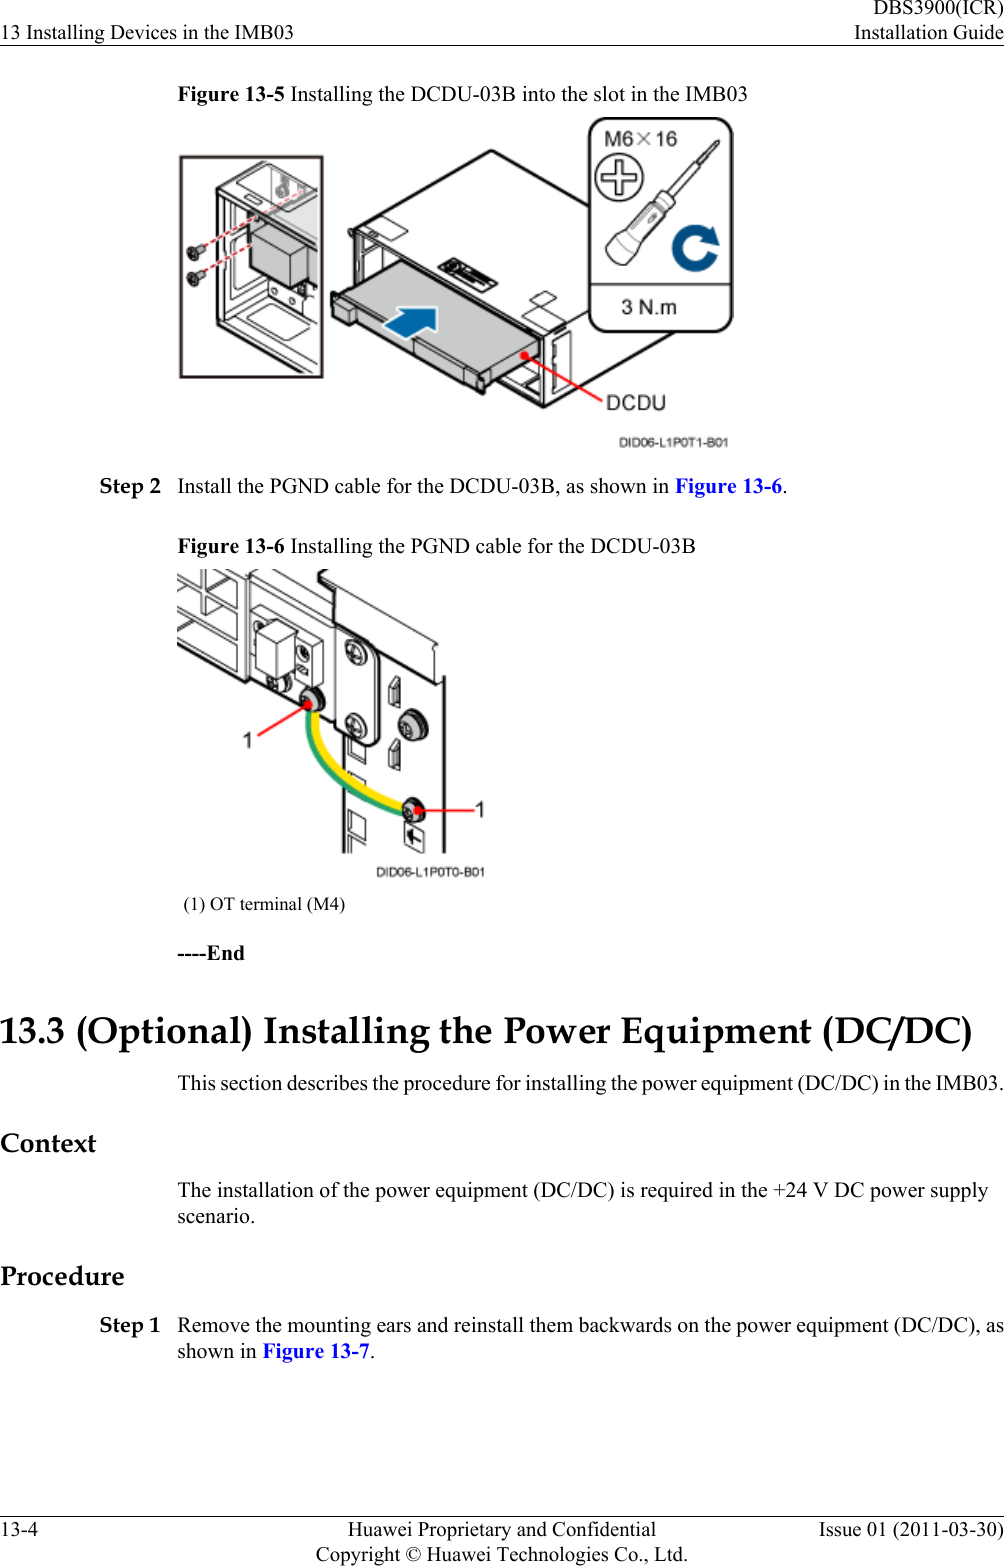 Figure 13-5 Installing the DCDU-03B into the slot in the IMB03Step 2 Install the PGND cable for the DCDU-03B, as shown in Figure 13-6.Figure 13-6 Installing the PGND cable for the DCDU-03B(1) OT terminal (M4)----End13.3 (Optional) Installing the Power Equipment (DC/DC)This section describes the procedure for installing the power equipment (DC/DC) in the IMB03.ContextThe installation of the power equipment (DC/DC) is required in the +24 V DC power supplyscenario.ProcedureStep 1 Remove the mounting ears and reinstall them backwards on the power equipment (DC/DC), asshown in Figure 13-7.13 Installing Devices in the IMB03DBS3900(ICR)Installation Guide13-4 Huawei Proprietary and ConfidentialCopyright © Huawei Technologies Co., Ltd.Issue 01 (2011-03-30)